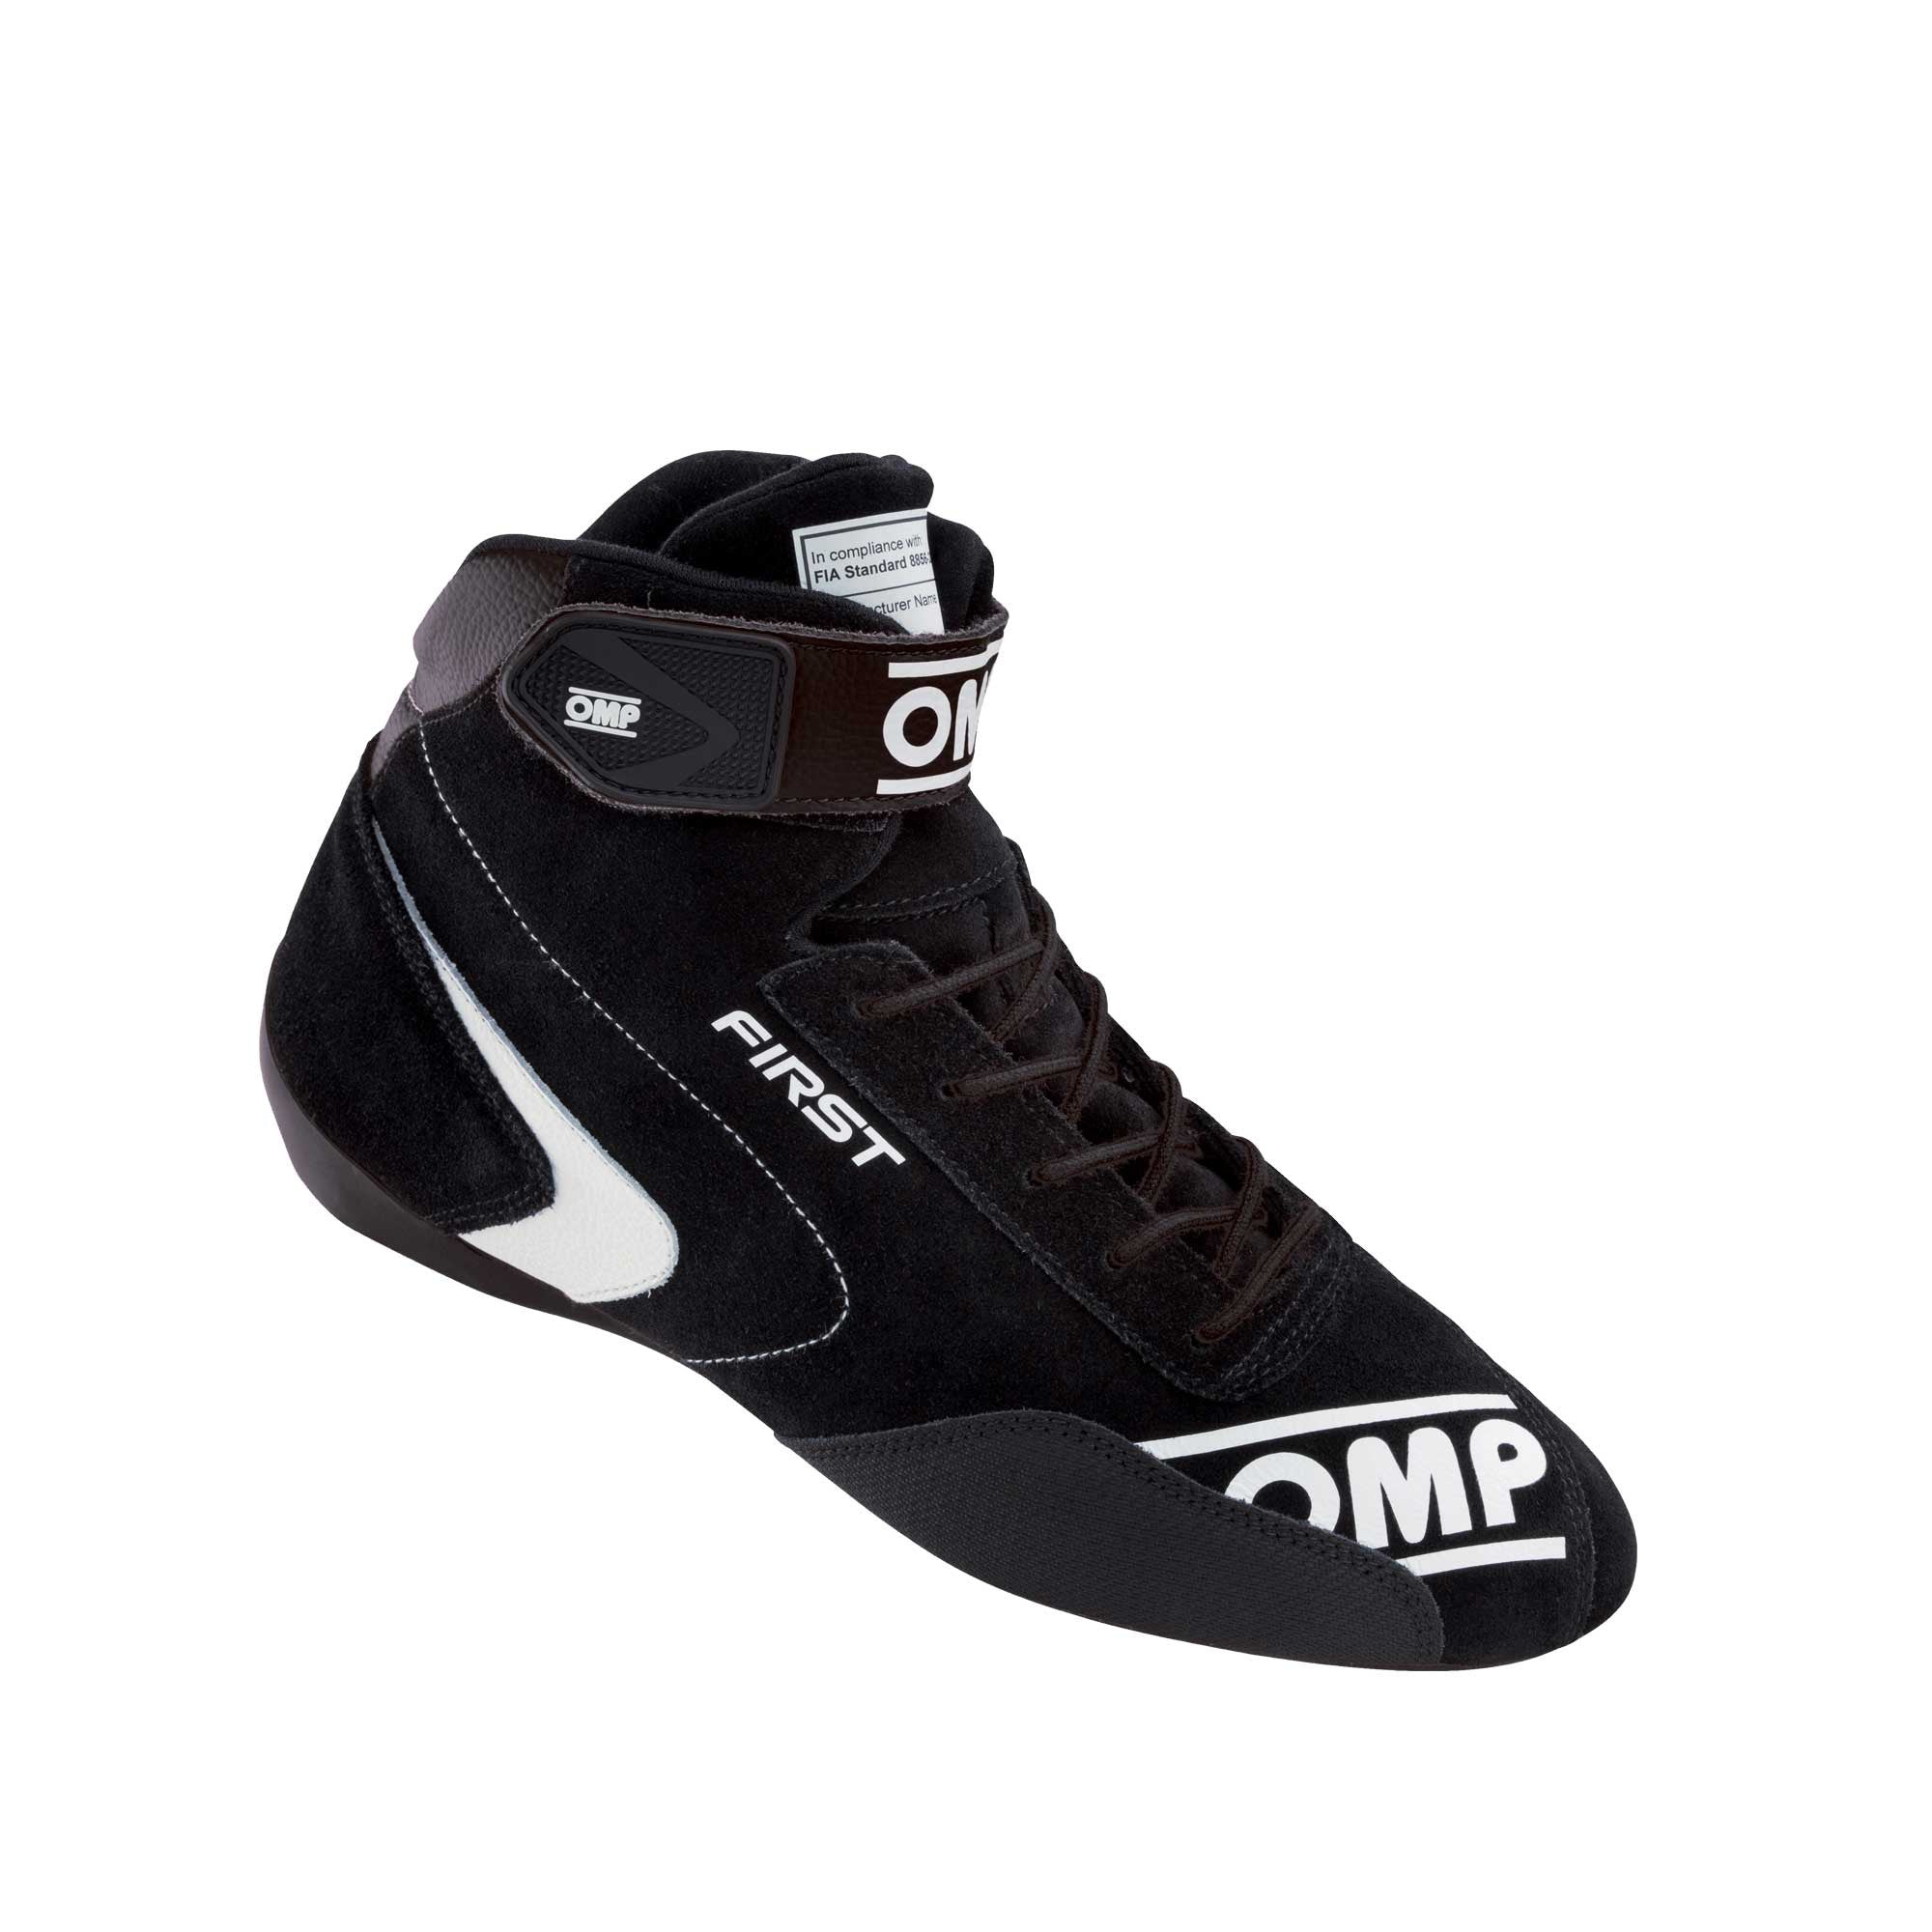 OMP RACING SHOE First Series - Professional Racing Safety Equipment - Paragon Competition in Toronto